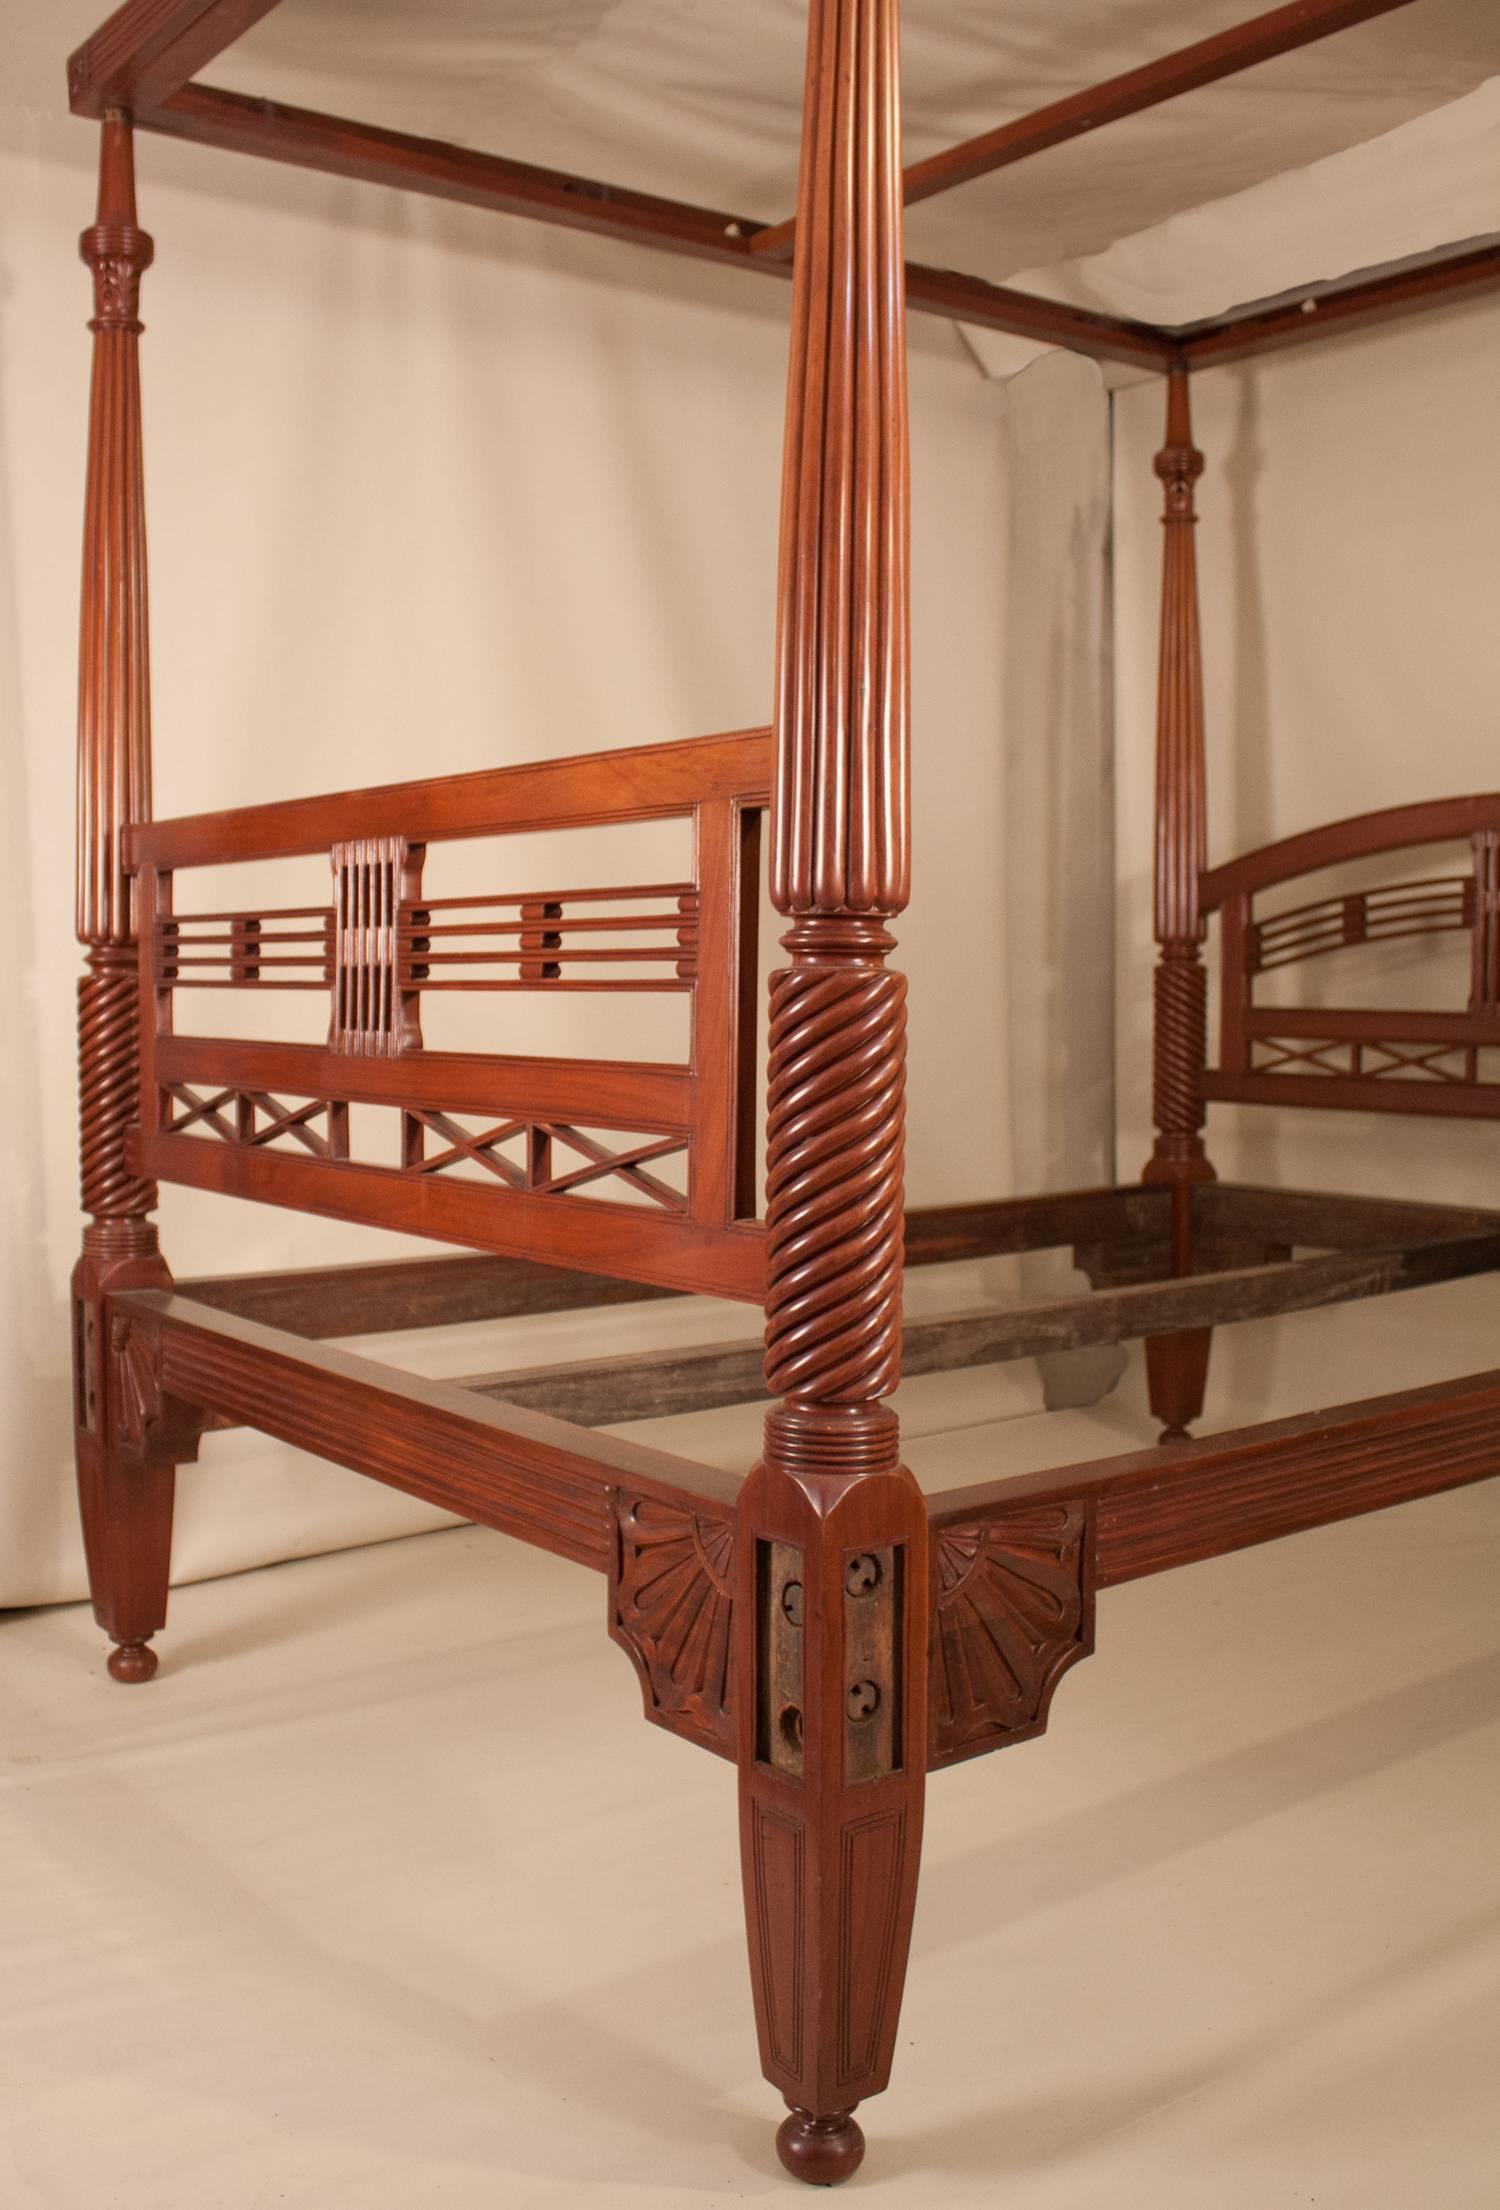 Hand-carved mahogany four post bed from British India, circa 1920. This queen-sized bed, which was restored at some point, has both beautiful wood tone and luster. Its complete tester, or canopy, would have been used as a frame for mosquito netting.